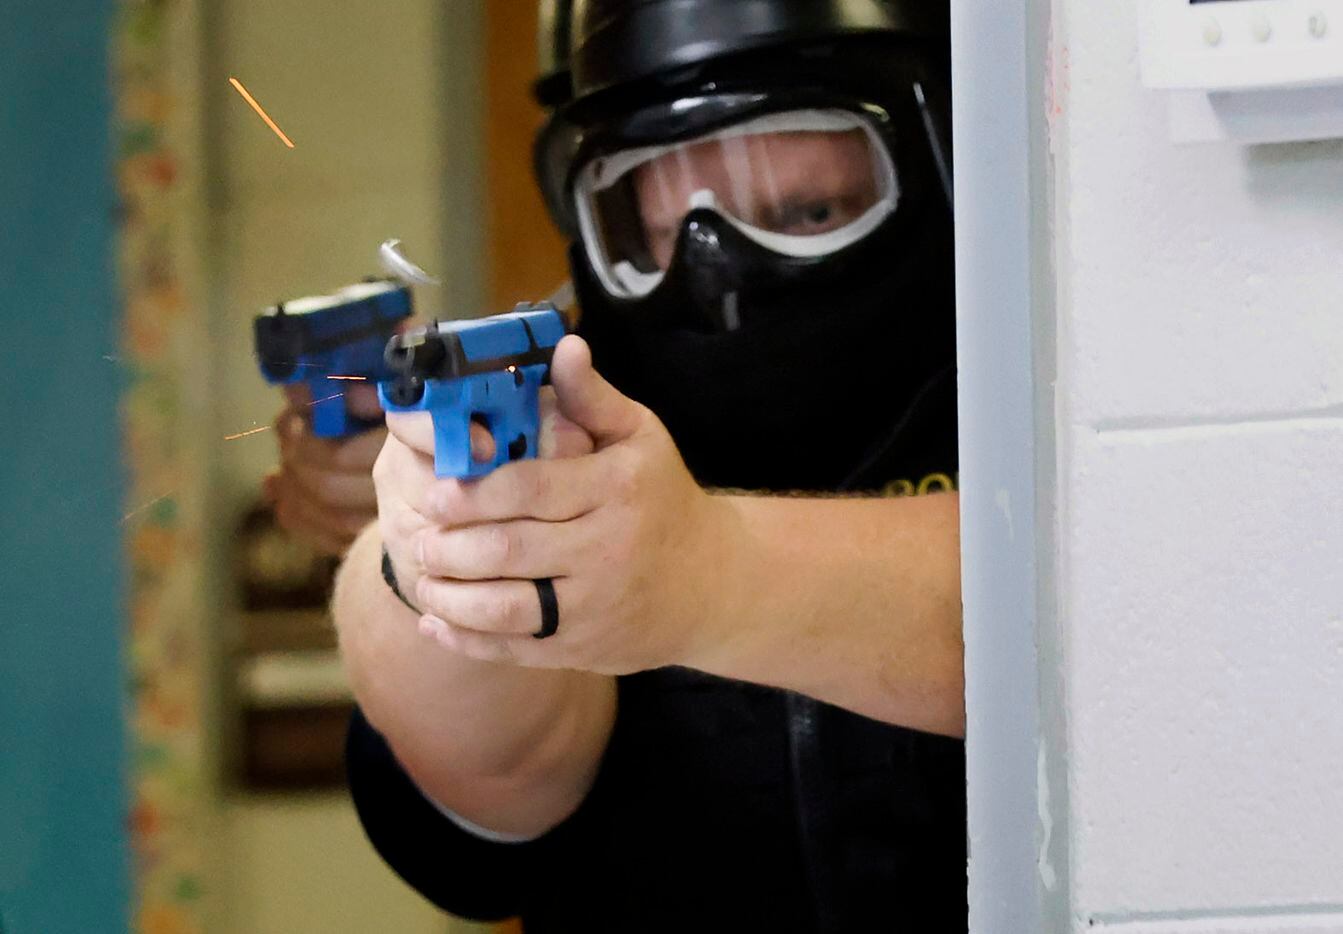 Athens Police Officer Roger Keith fires a soap-based marking cartridge at an active shooter...